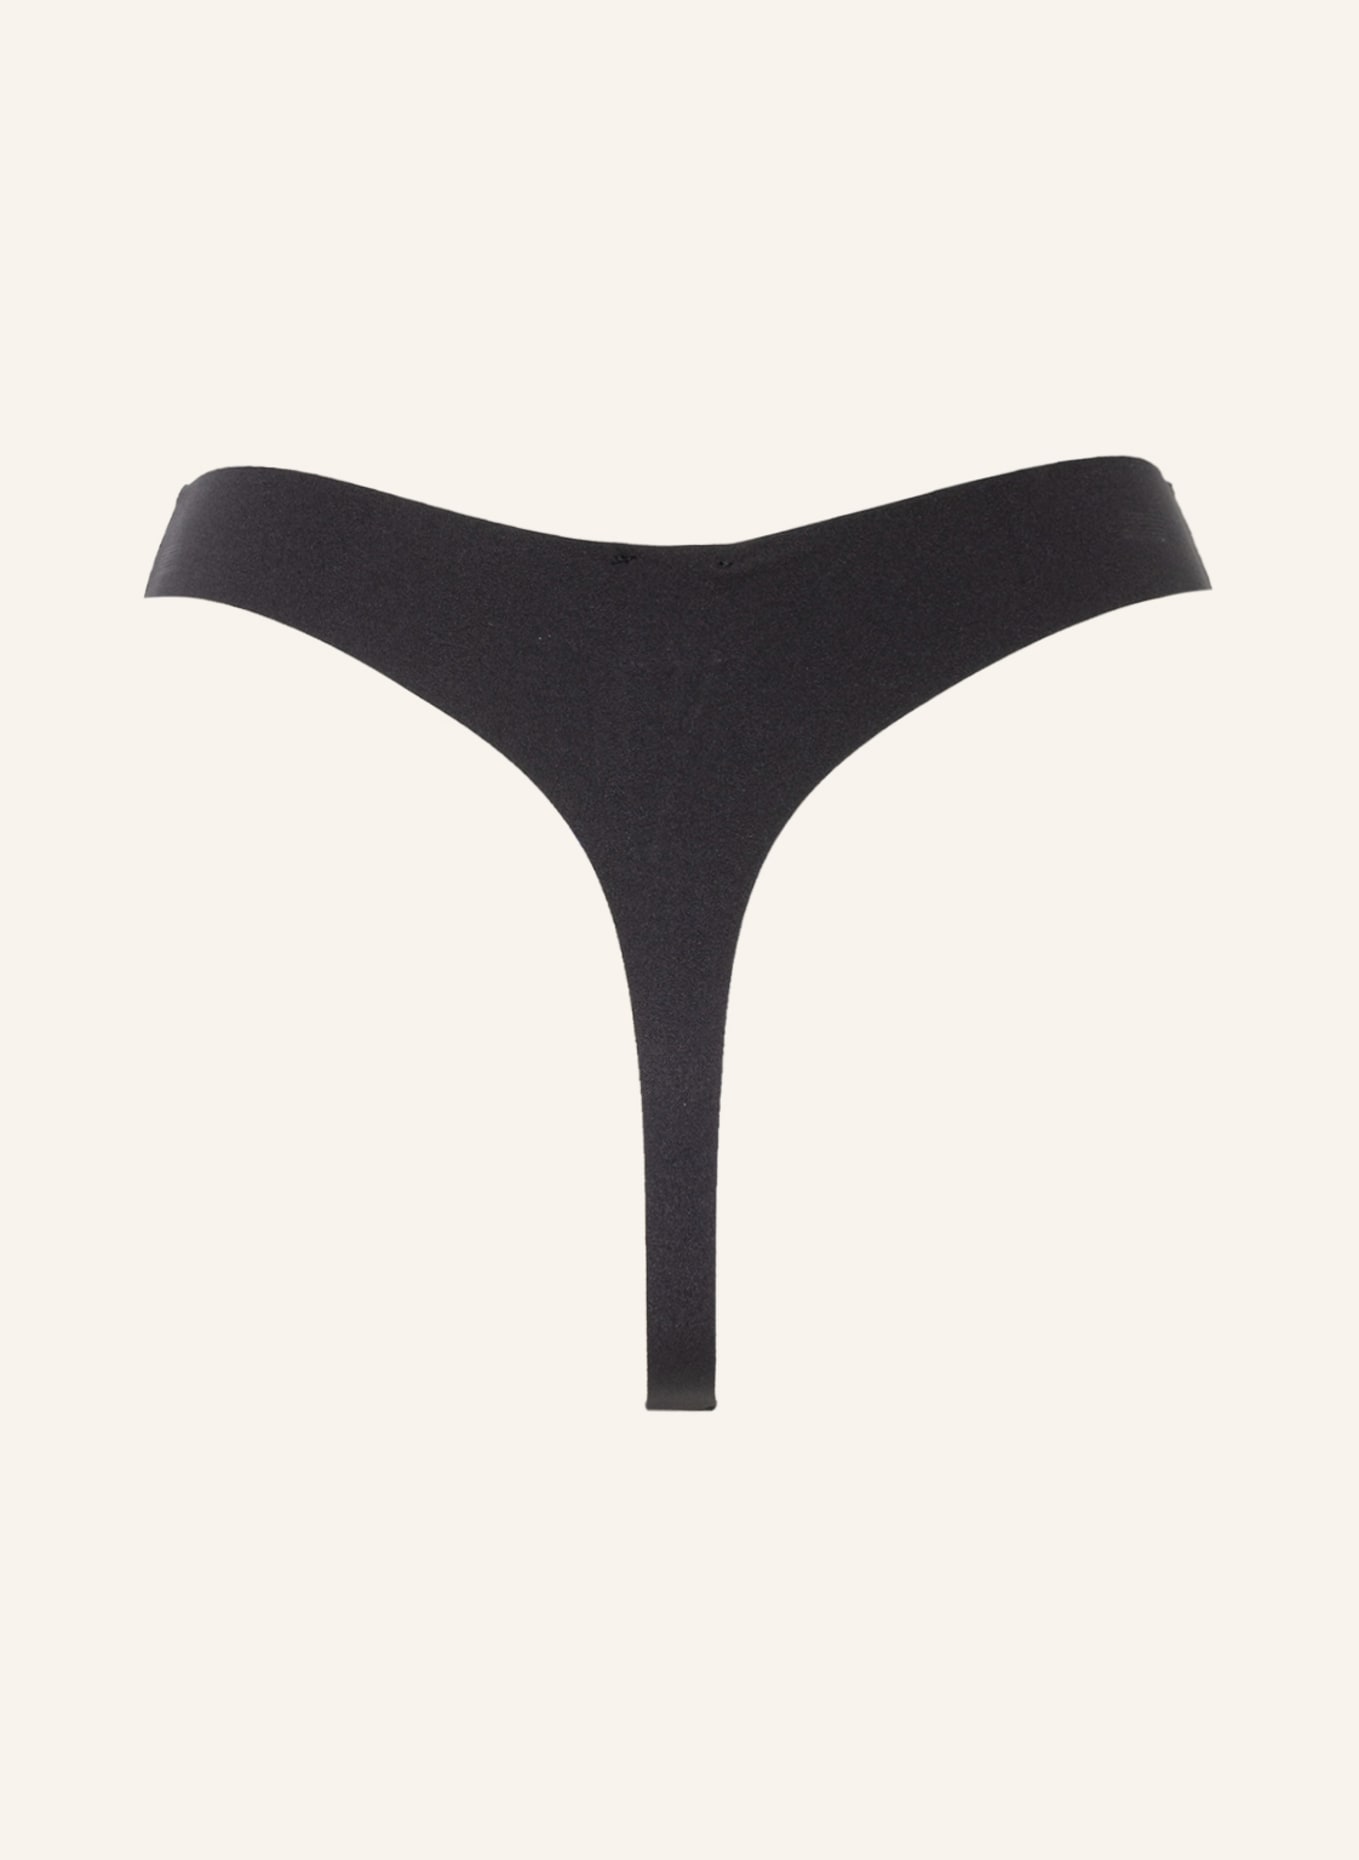 adidas 2-pack of high-waisted thongs in black